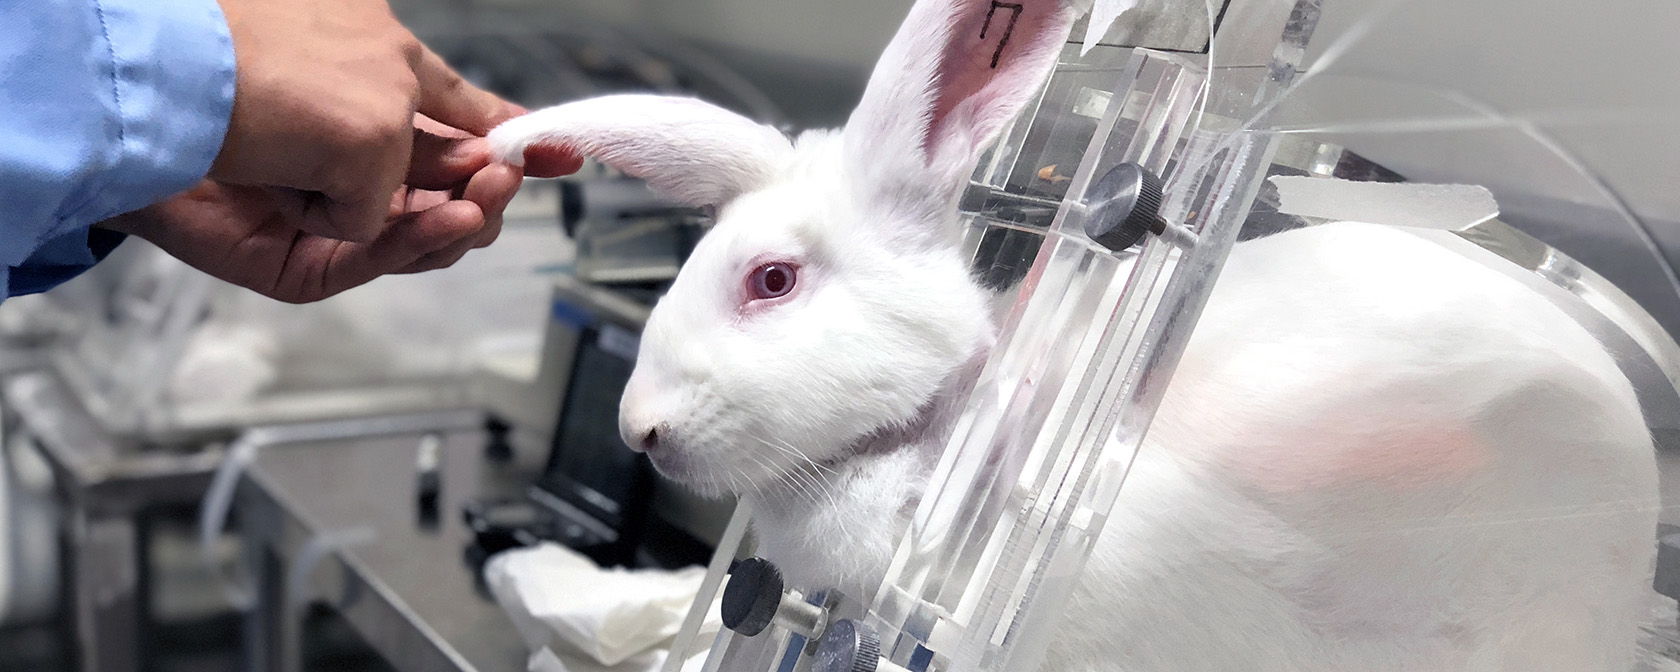 Researcher injects novel medicine into laboratory rabbit by intravenous injection for testing toxicity and safety. 